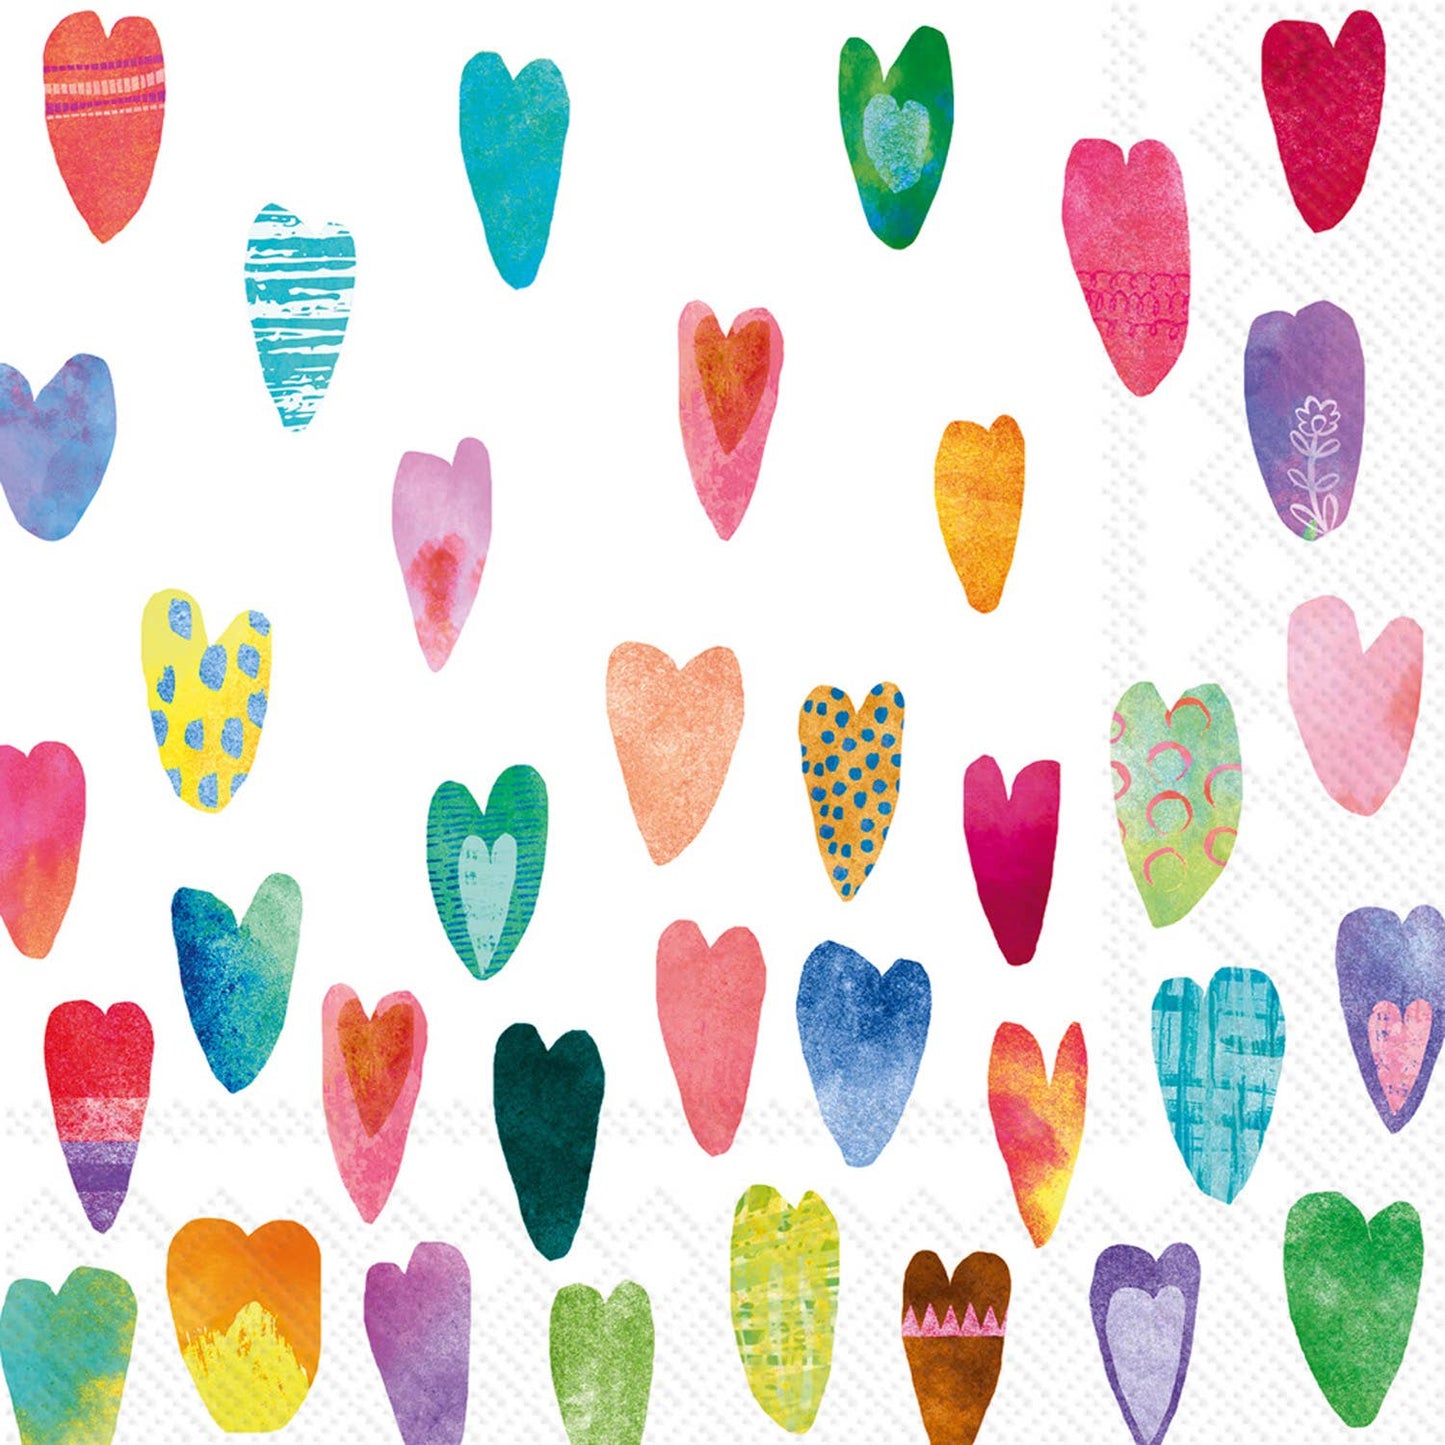 Watercolor Hearts Valentine Cocktail NapkinsPack of 20